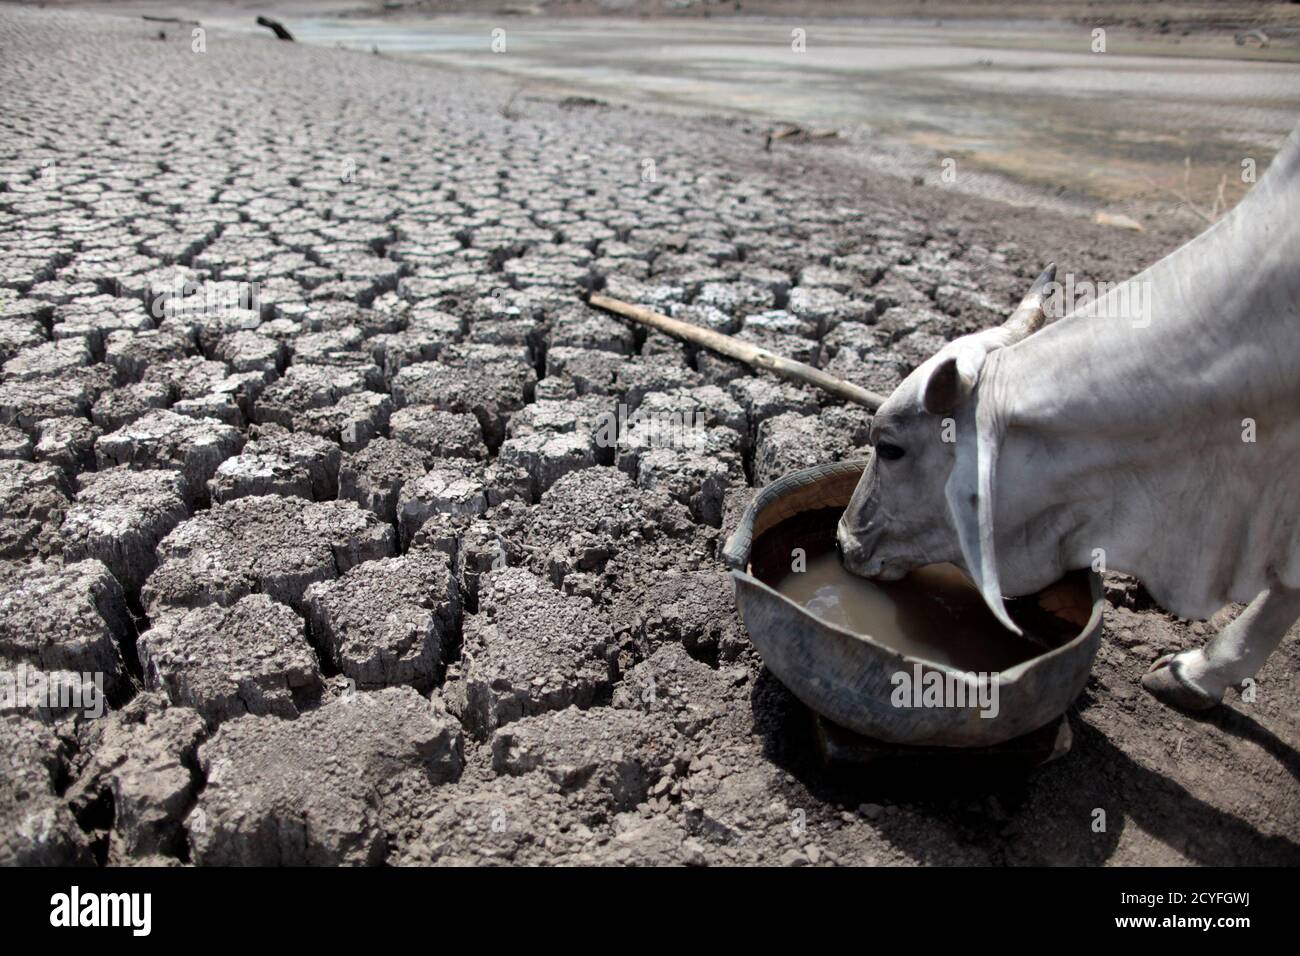 A cow drinks water on cracked ground at the Las Canoas dam, some 59 km (37  miles) north of the capital Managua April 26, 2013. A large area of the dam  has